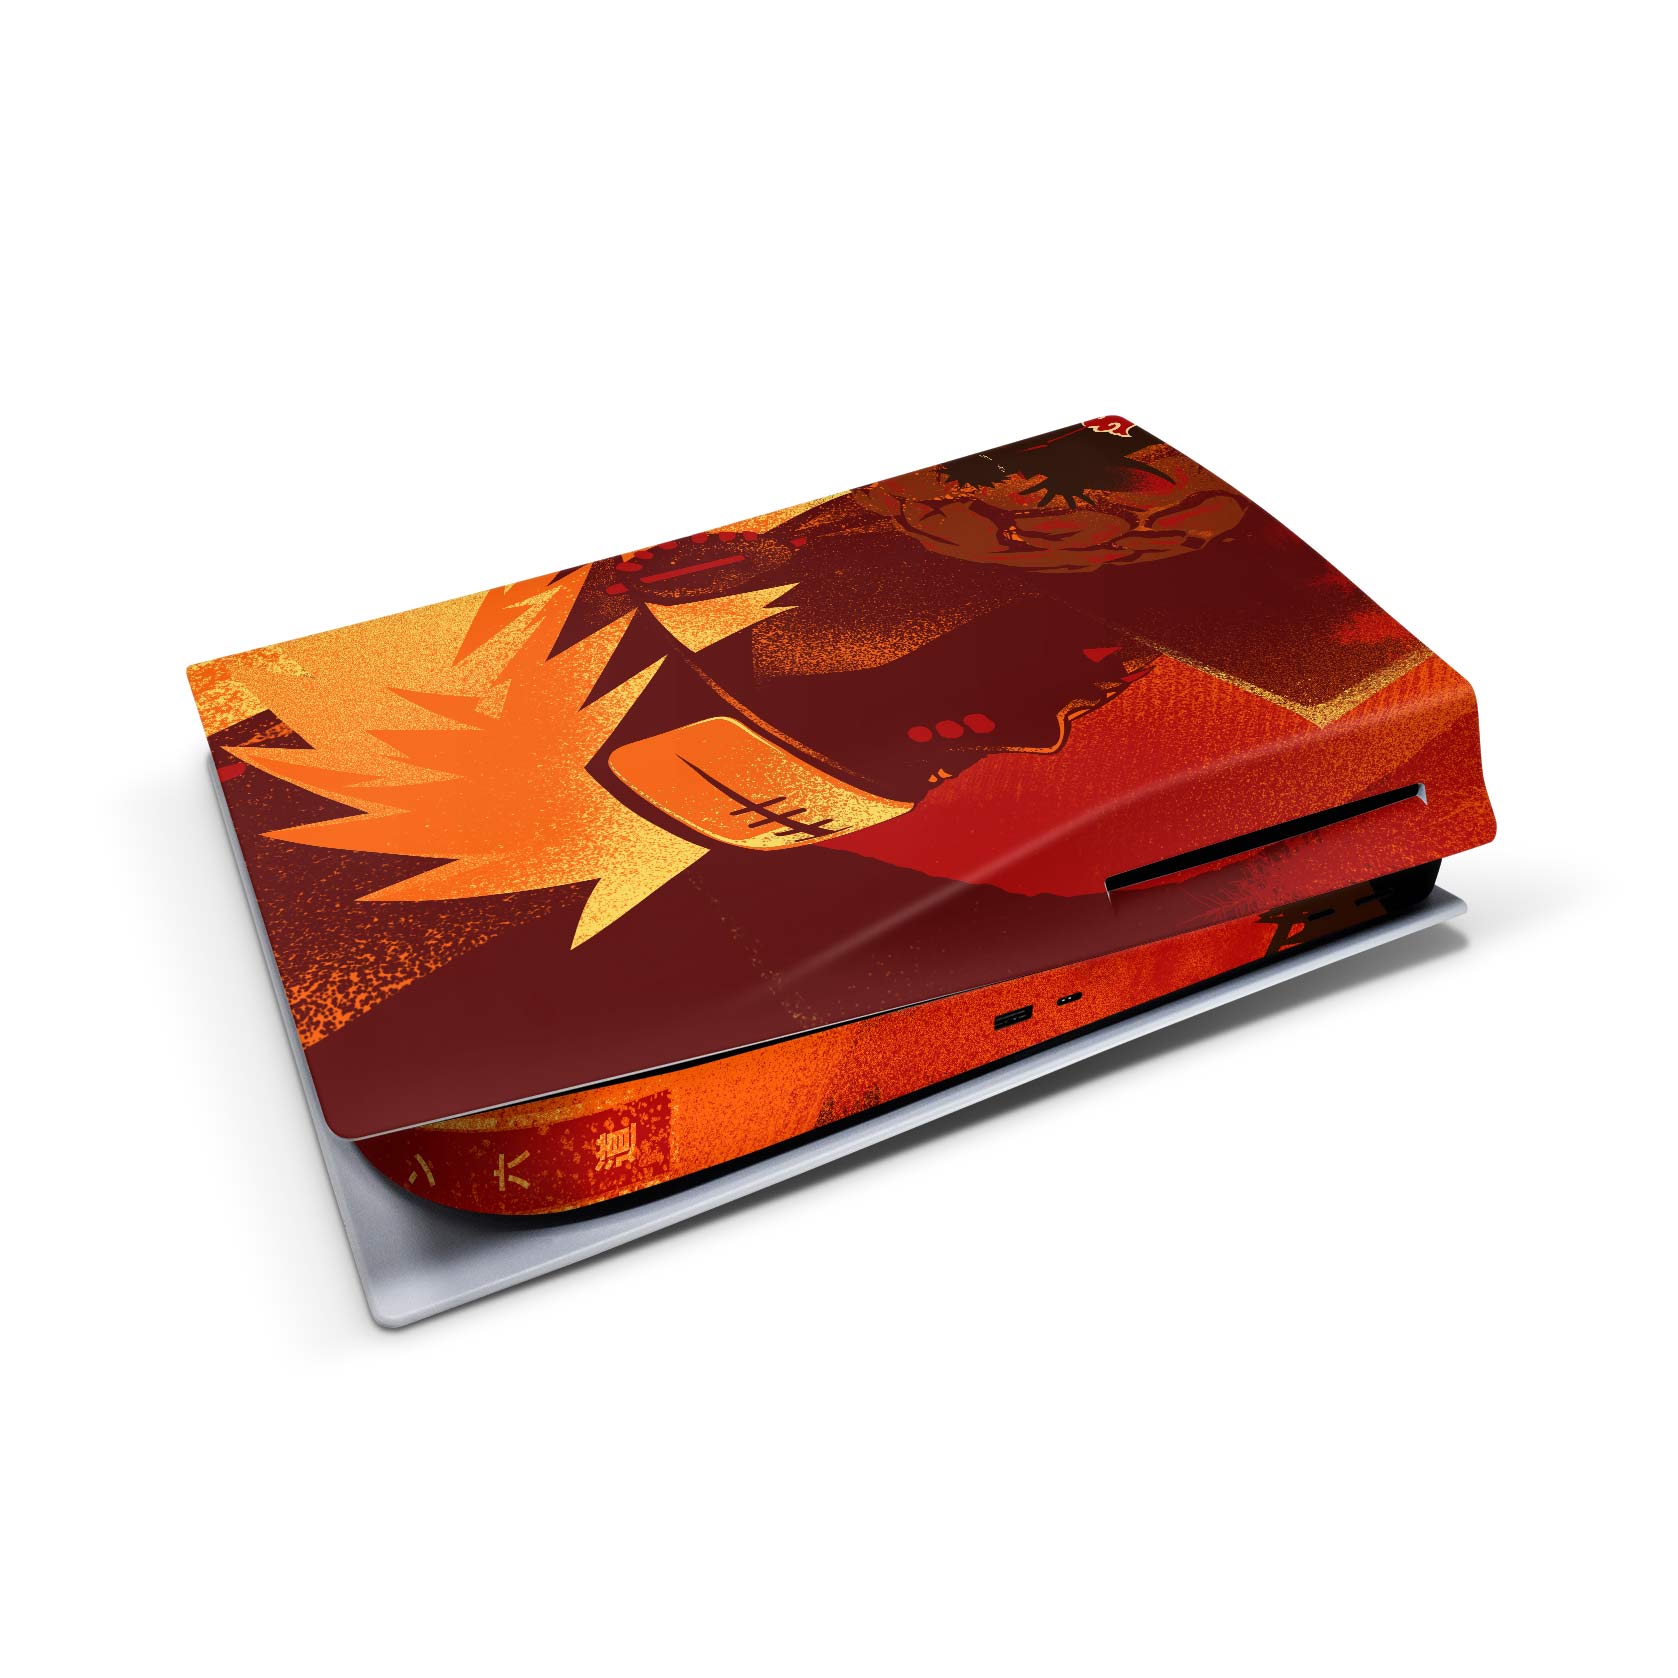 Six Paths of Pain - PS5 Console Skin